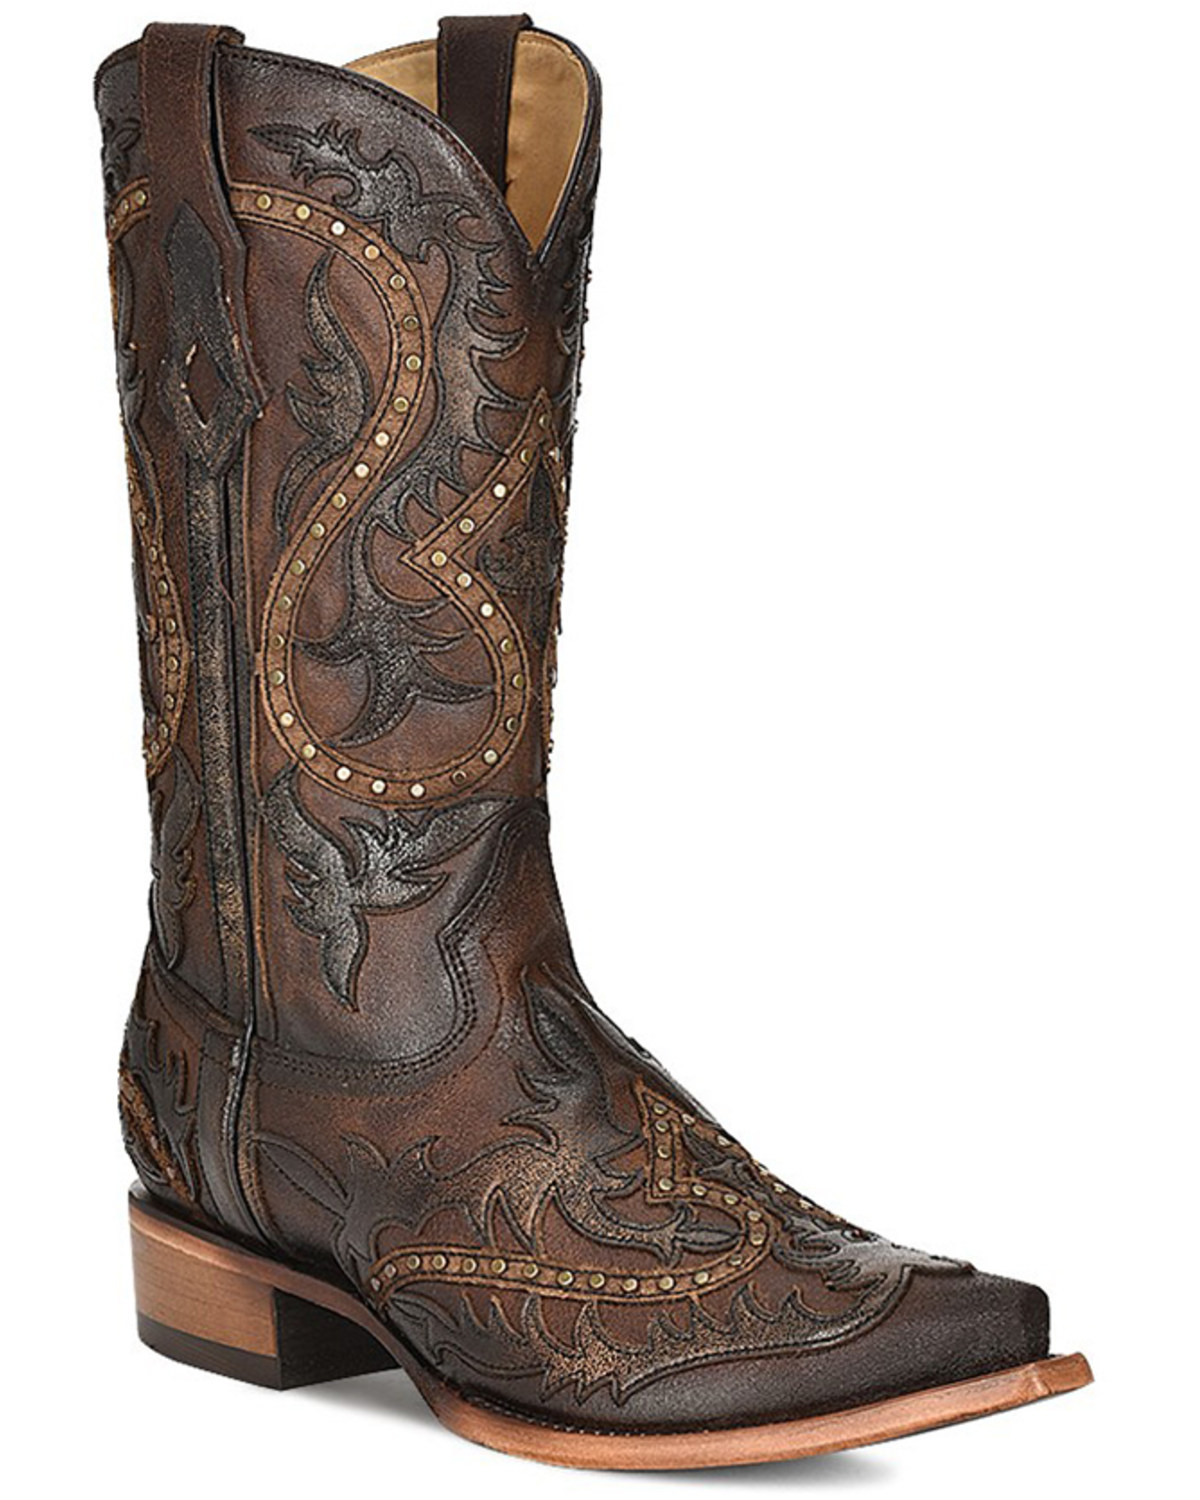 Corral Men's Embroidered and Embellished Western Boots - Snip Toe